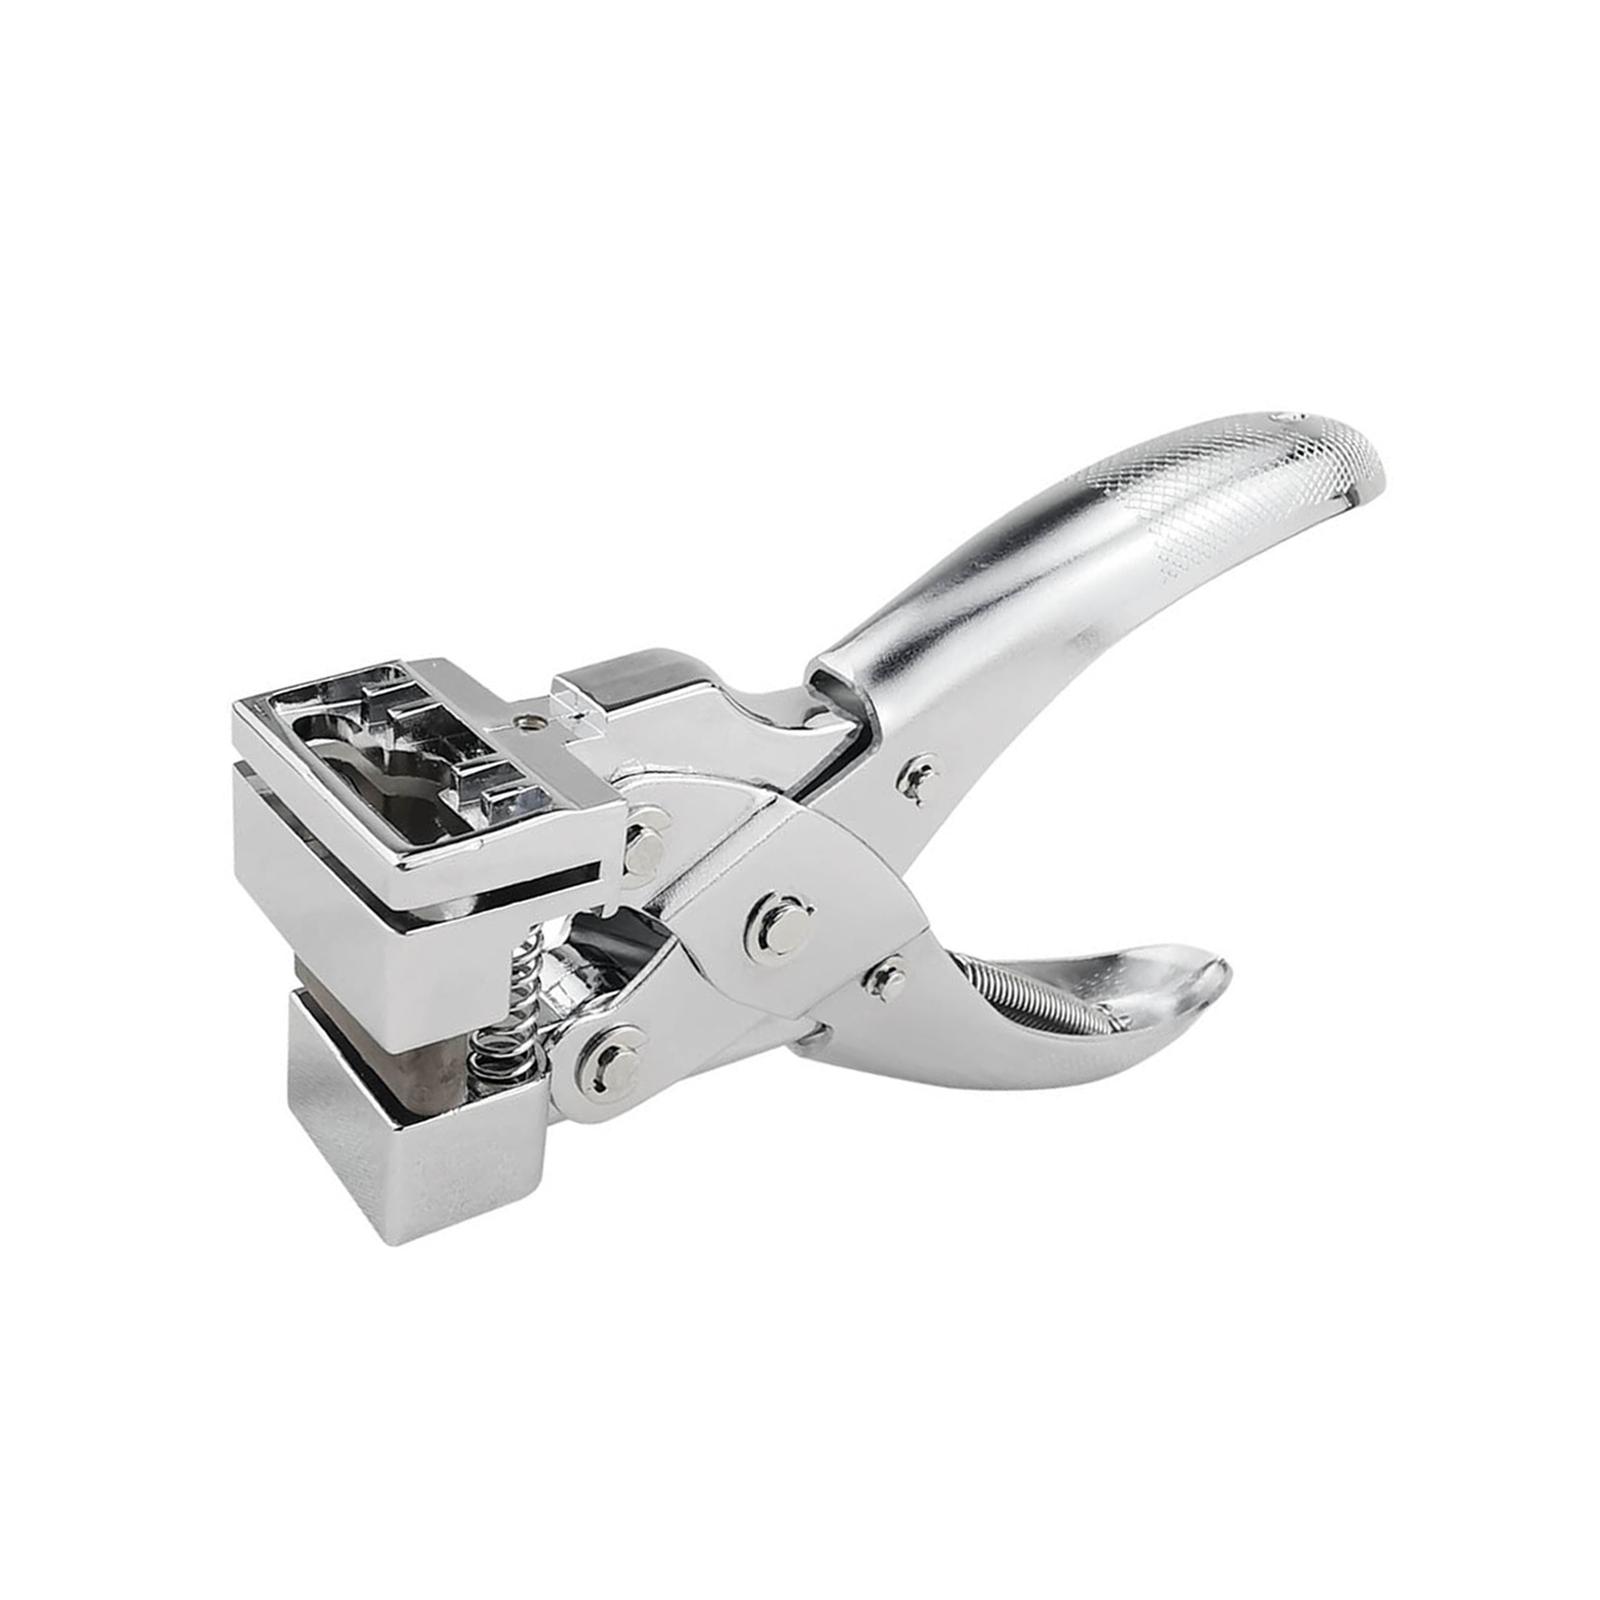 Slot Hole Punch,Portable Handheld Hole Puncher Heavy Duty,T Slot Hole Punch  Tool Paper Puncher Badge Holder,Badge Hole Punch Hook Clamp Pliers Kids